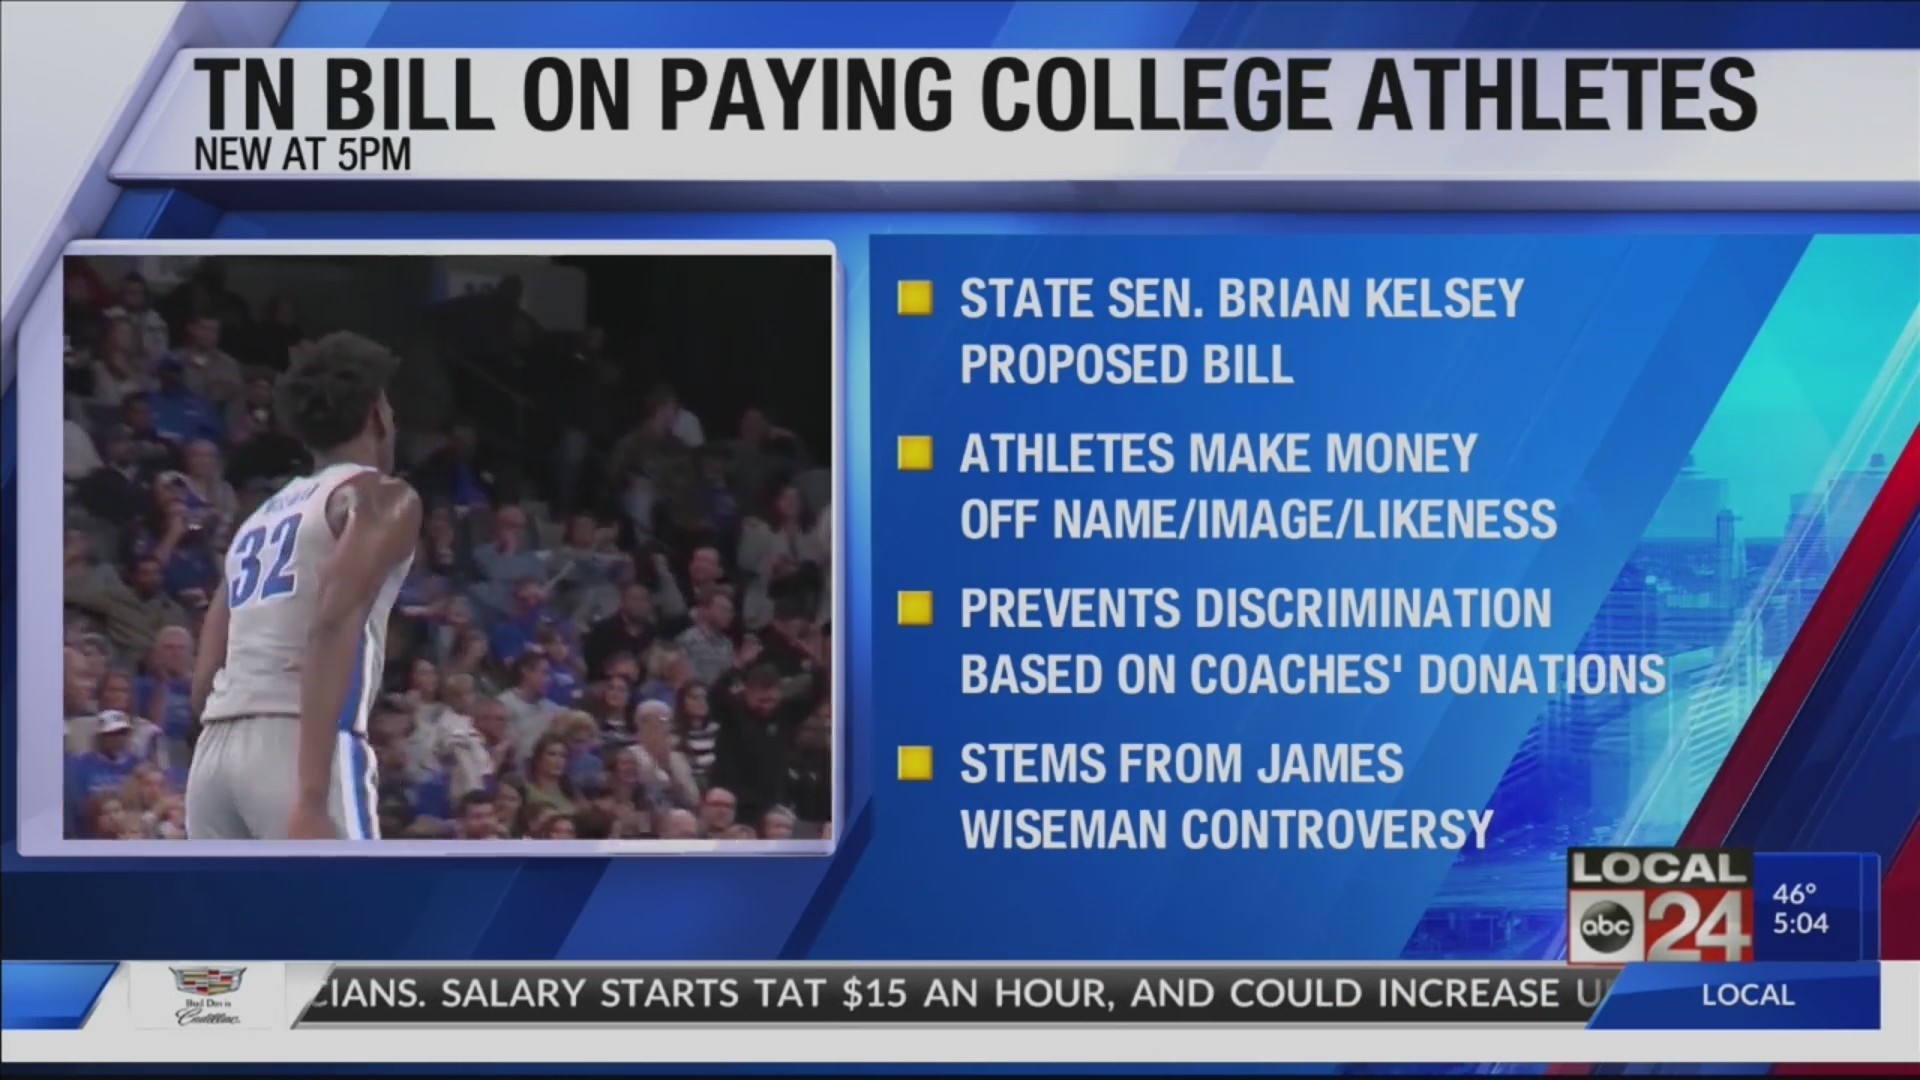 TN lawmakers to consider legislation to allow compensation for college athletes & prohibit discrimination based on coaches' donations